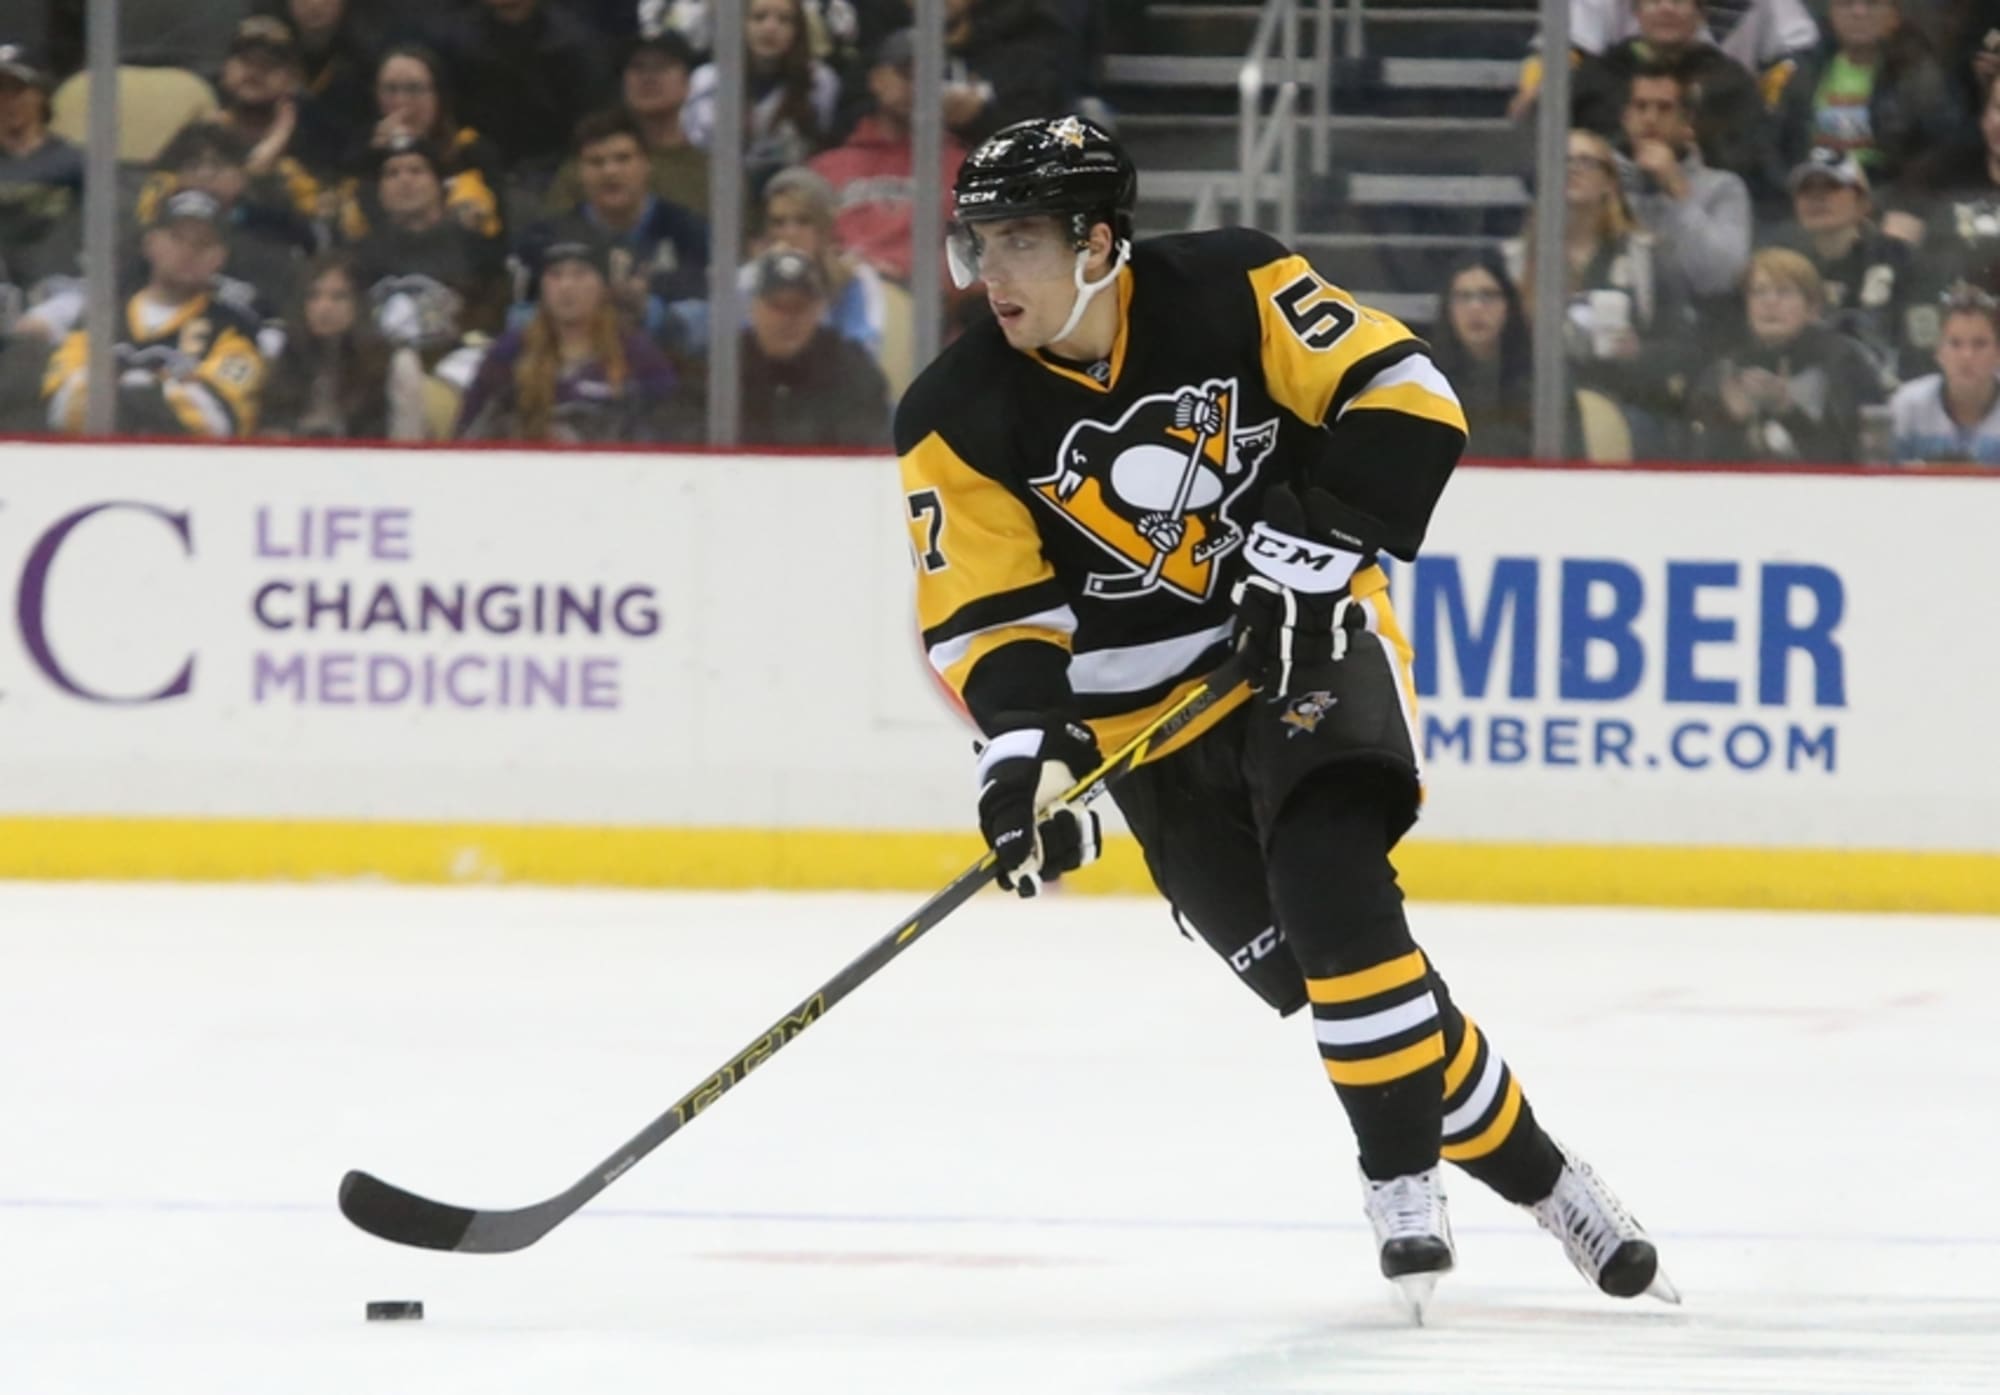 Hextall seems to indicate Penguins trade for 3rd line, won't dump top pick